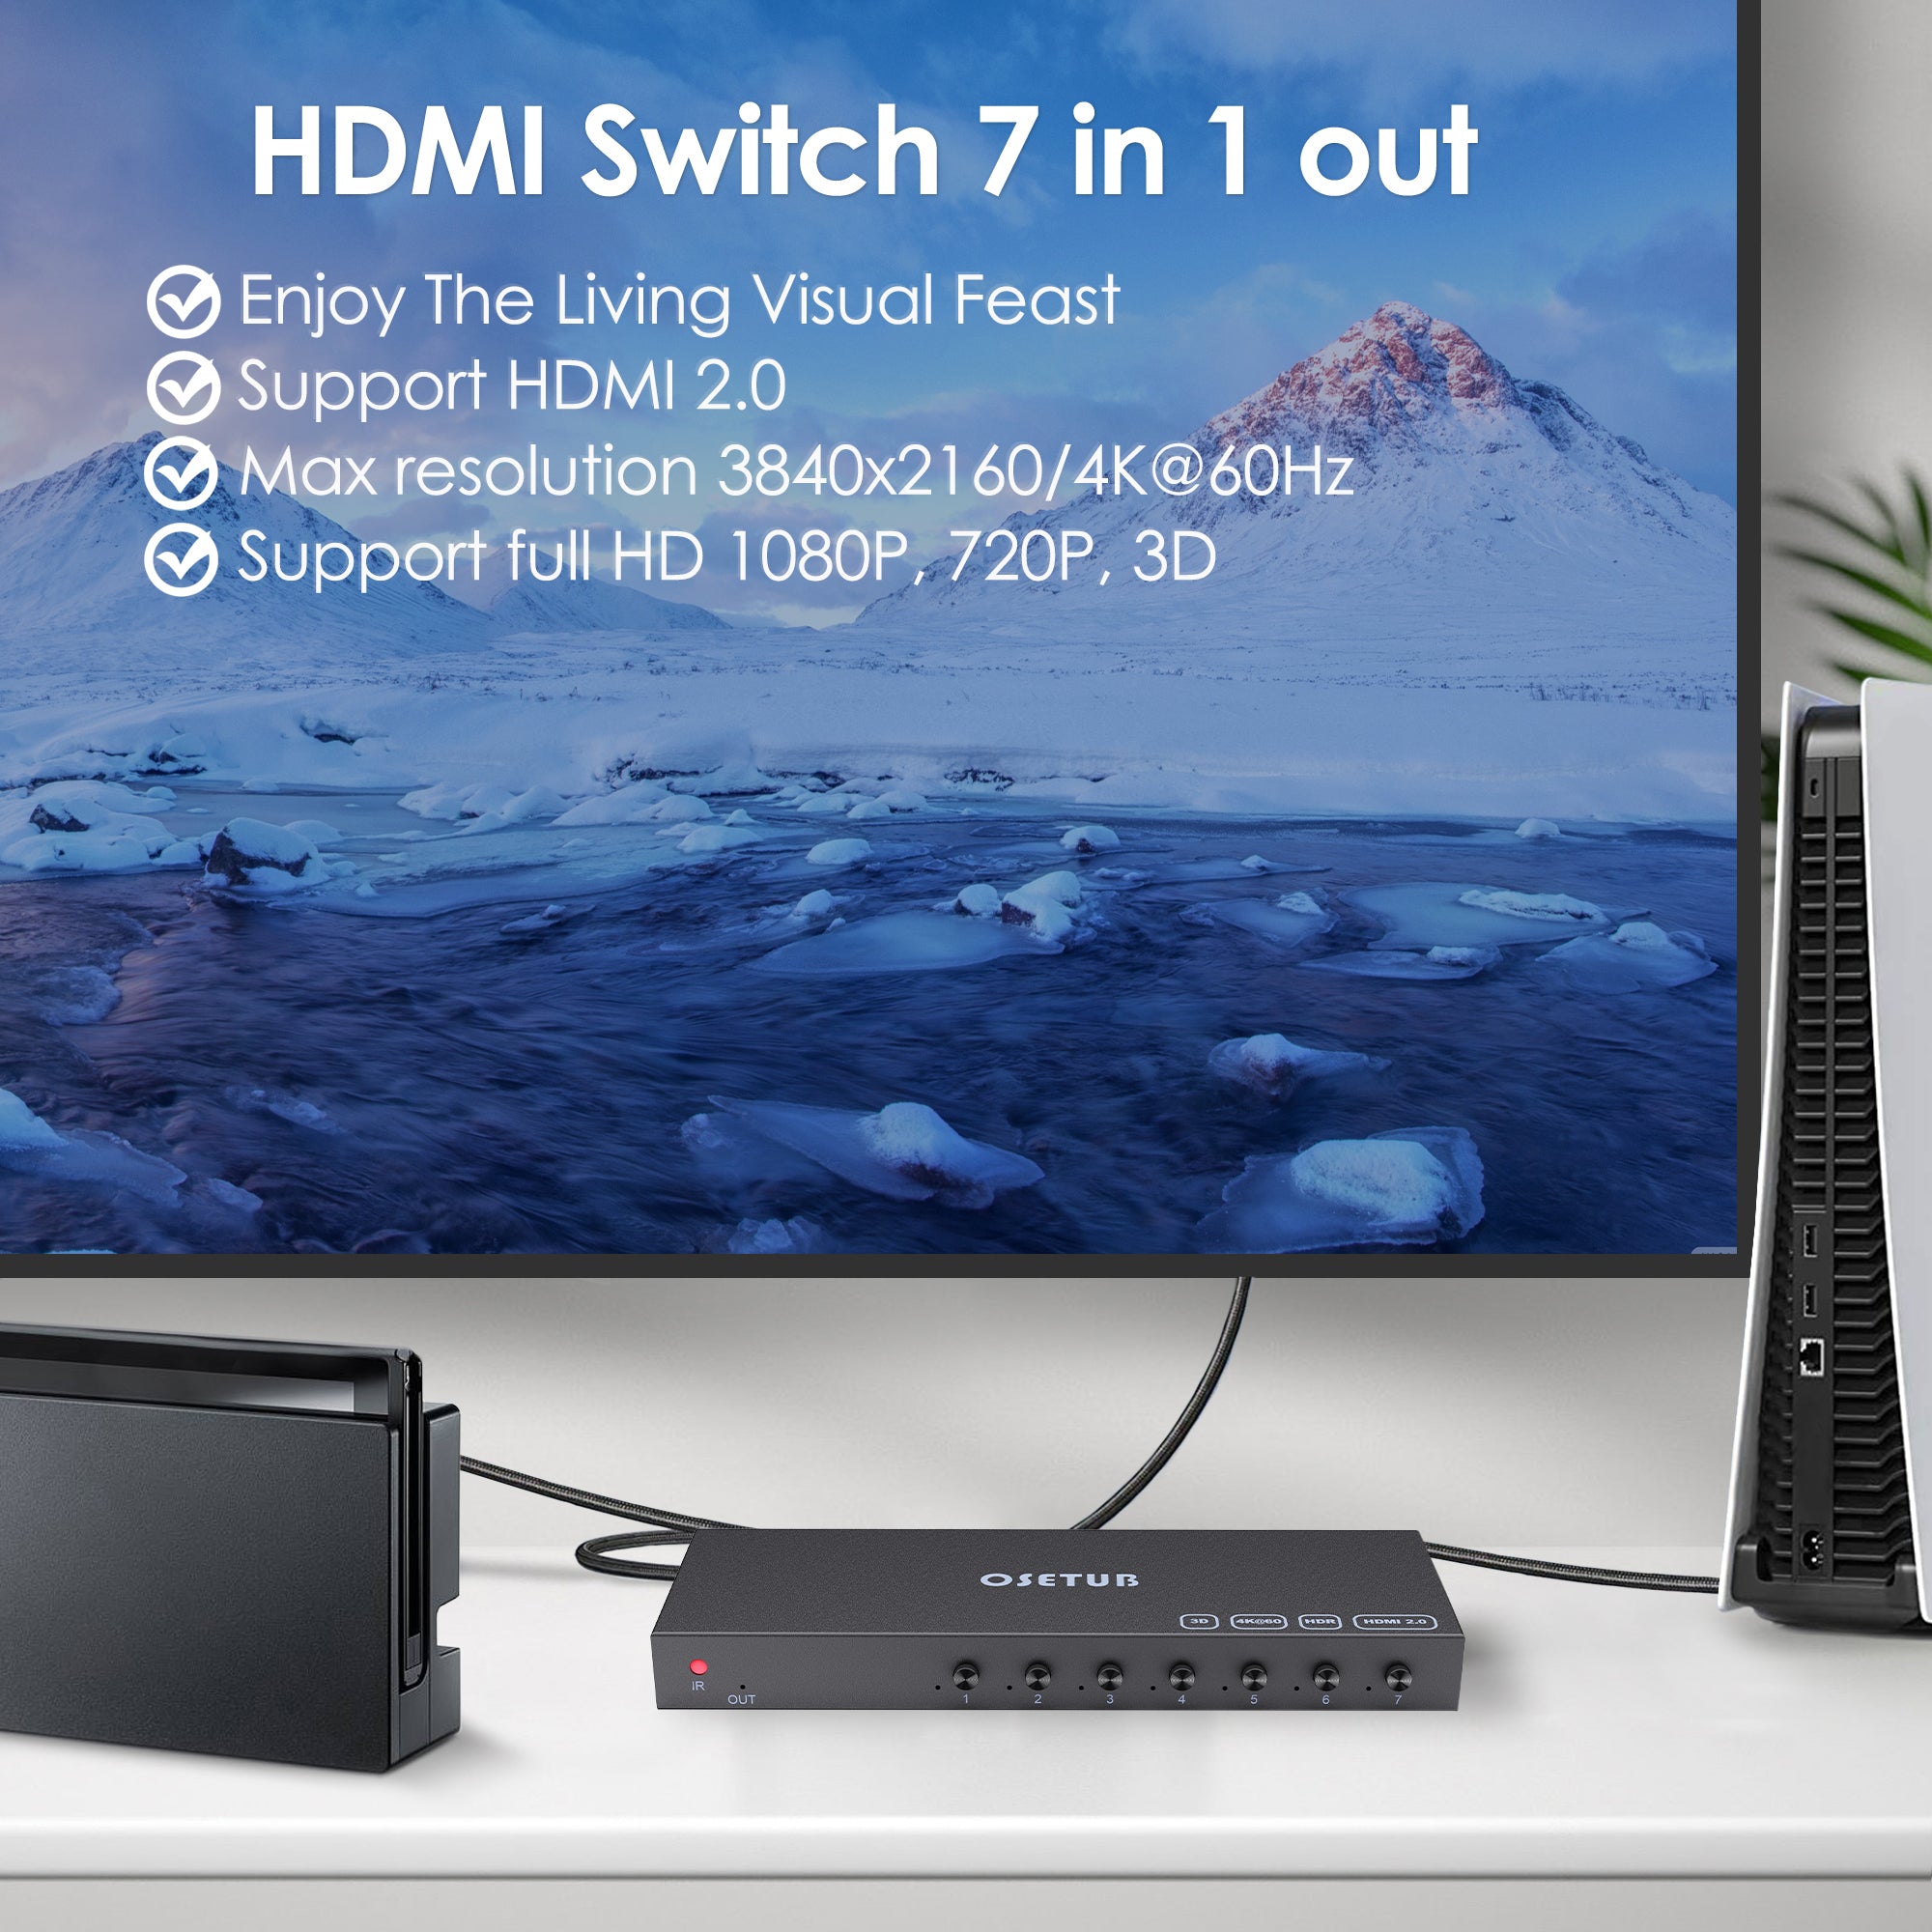 4K@60Hz 7 Port High Definition Switch, 7 in 1 Out High Definition Swit –  OseTub Store